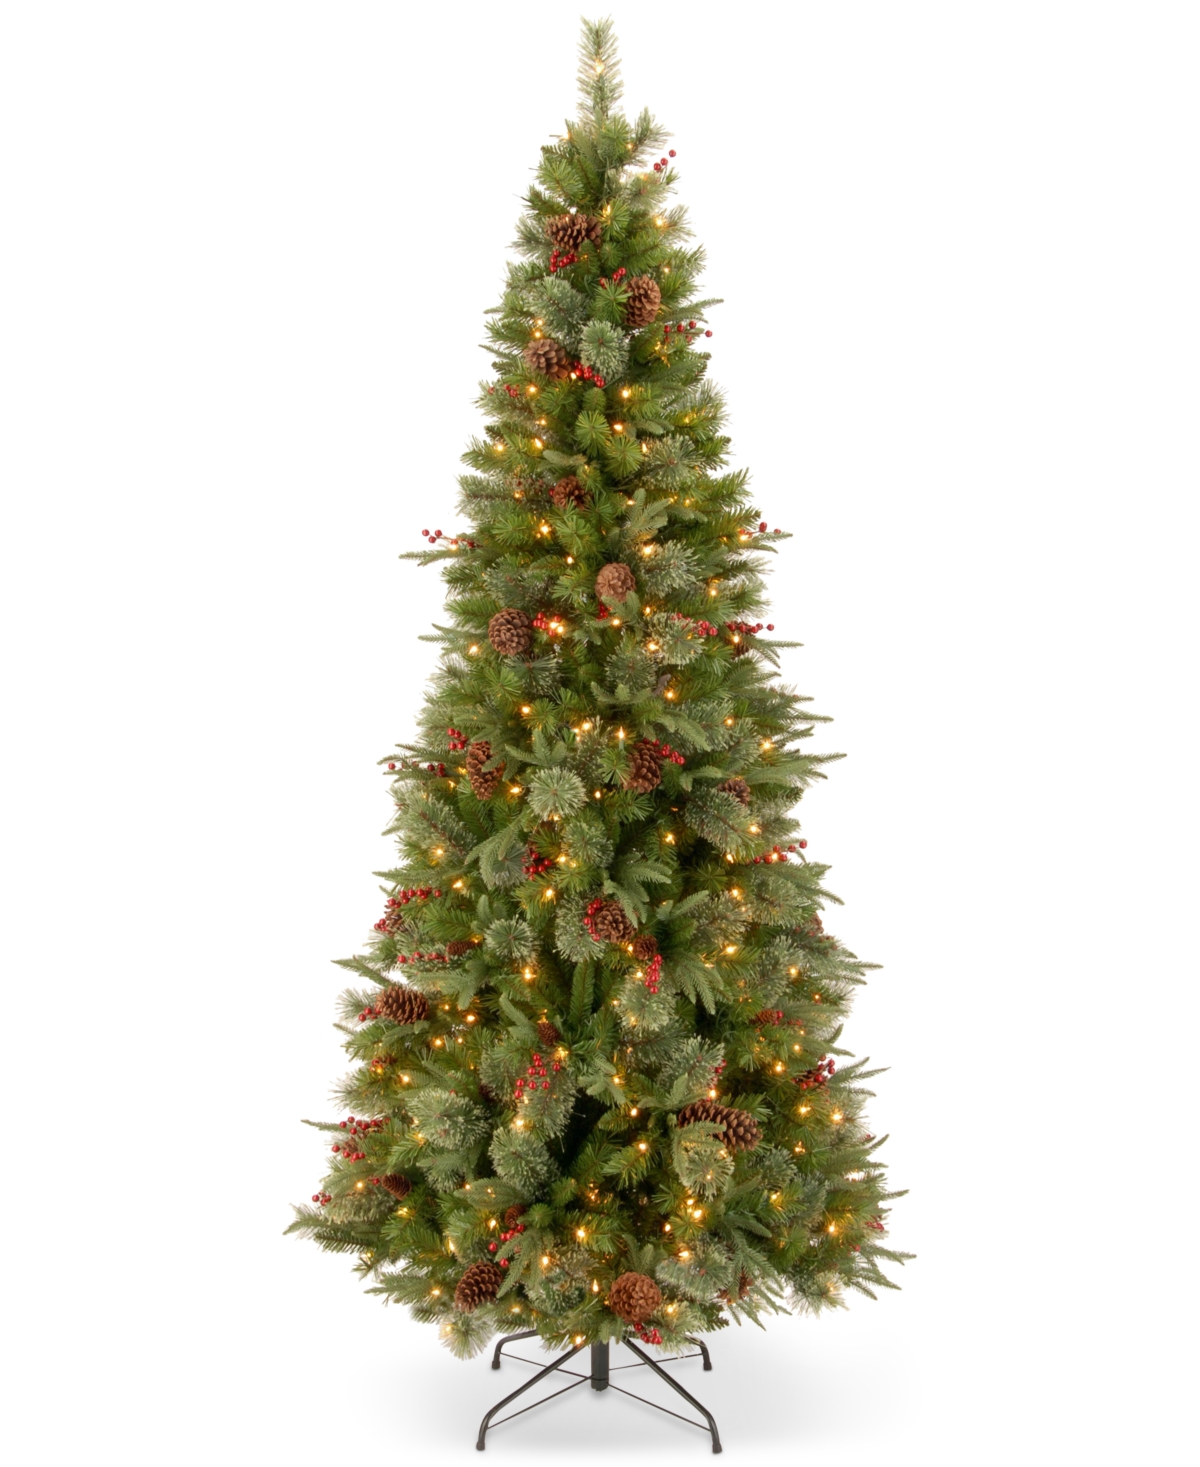 7.5' "Feel-Real" Colonial Slim Hinged Christmas Tree with 400 Clear Lights